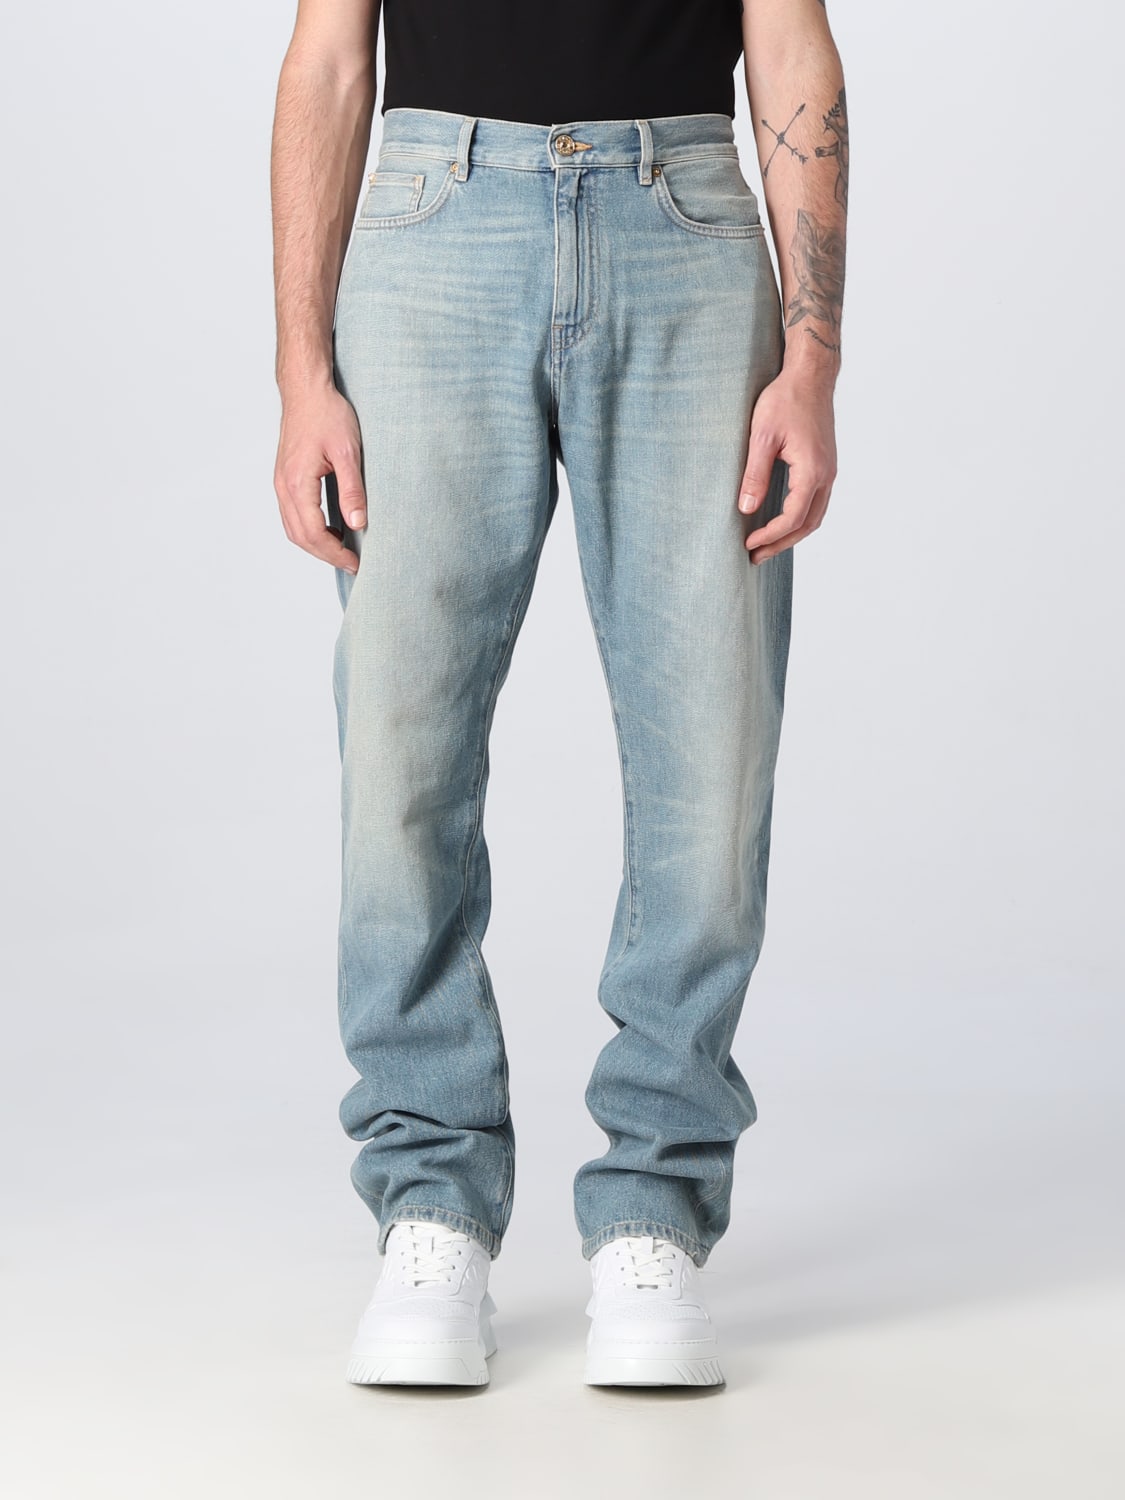 VERSACE: Medusa jeans in denim - Blue | Versace jeans 10078371A05561 on GIGLIO.COM